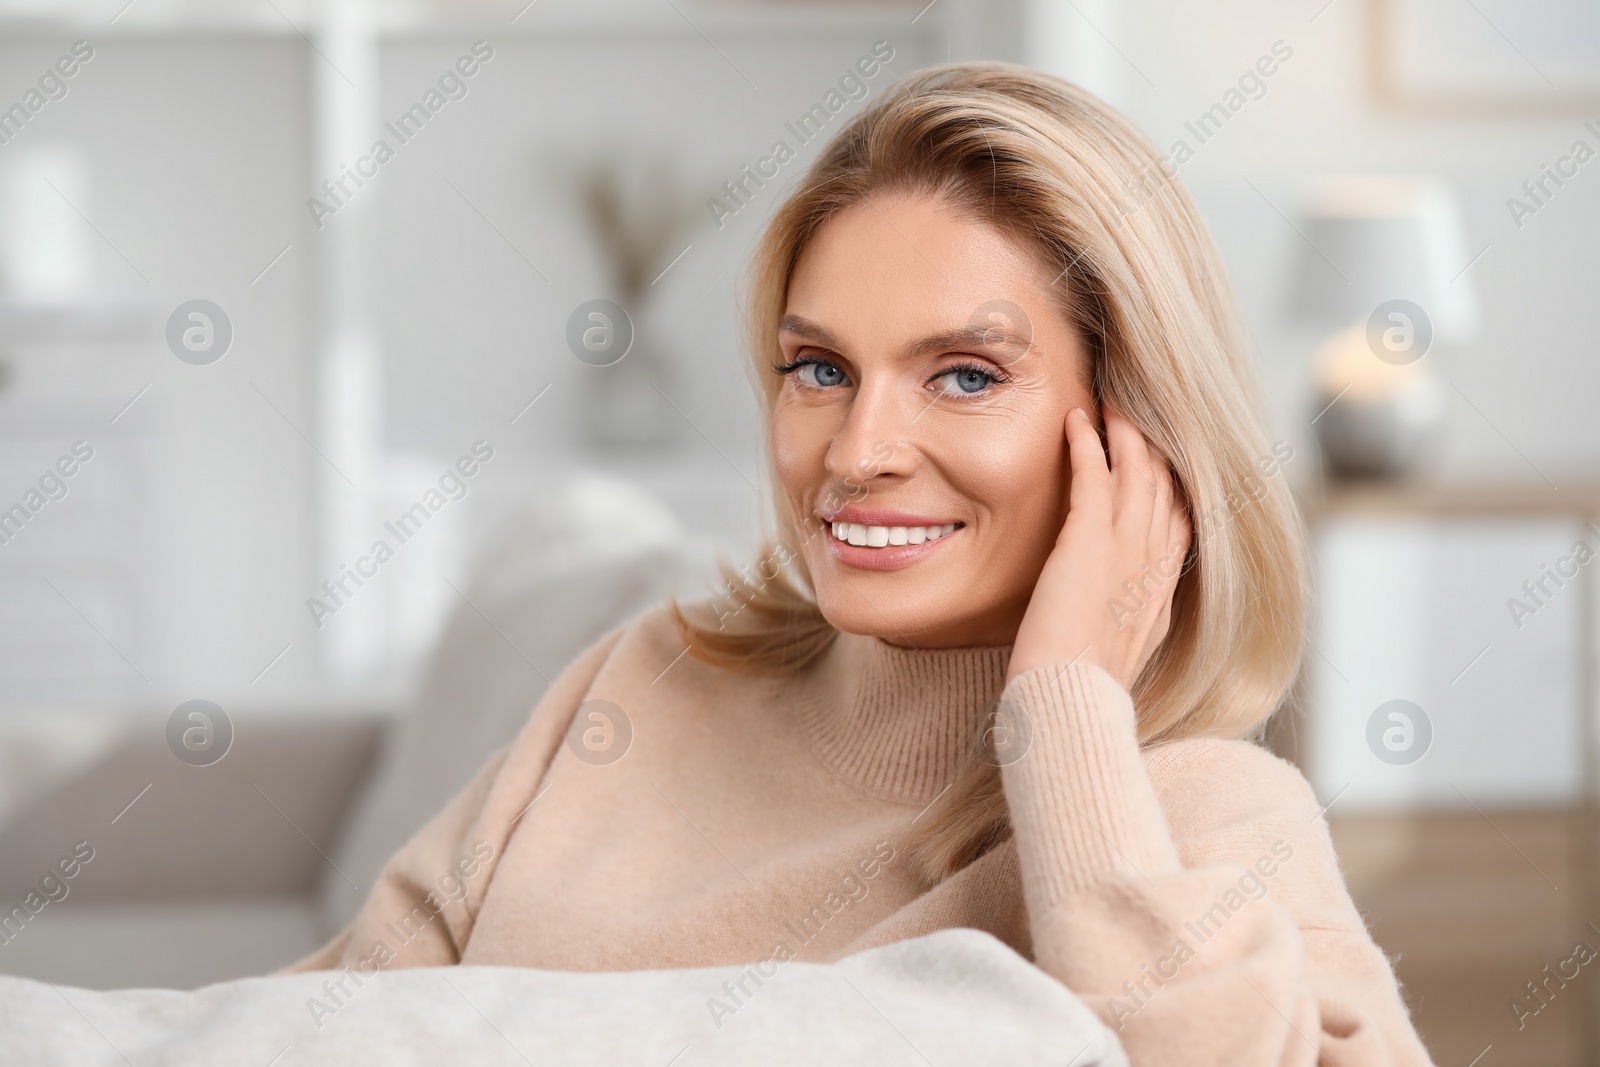 Photo of Portrait of smiling middle aged woman with blonde hair at home